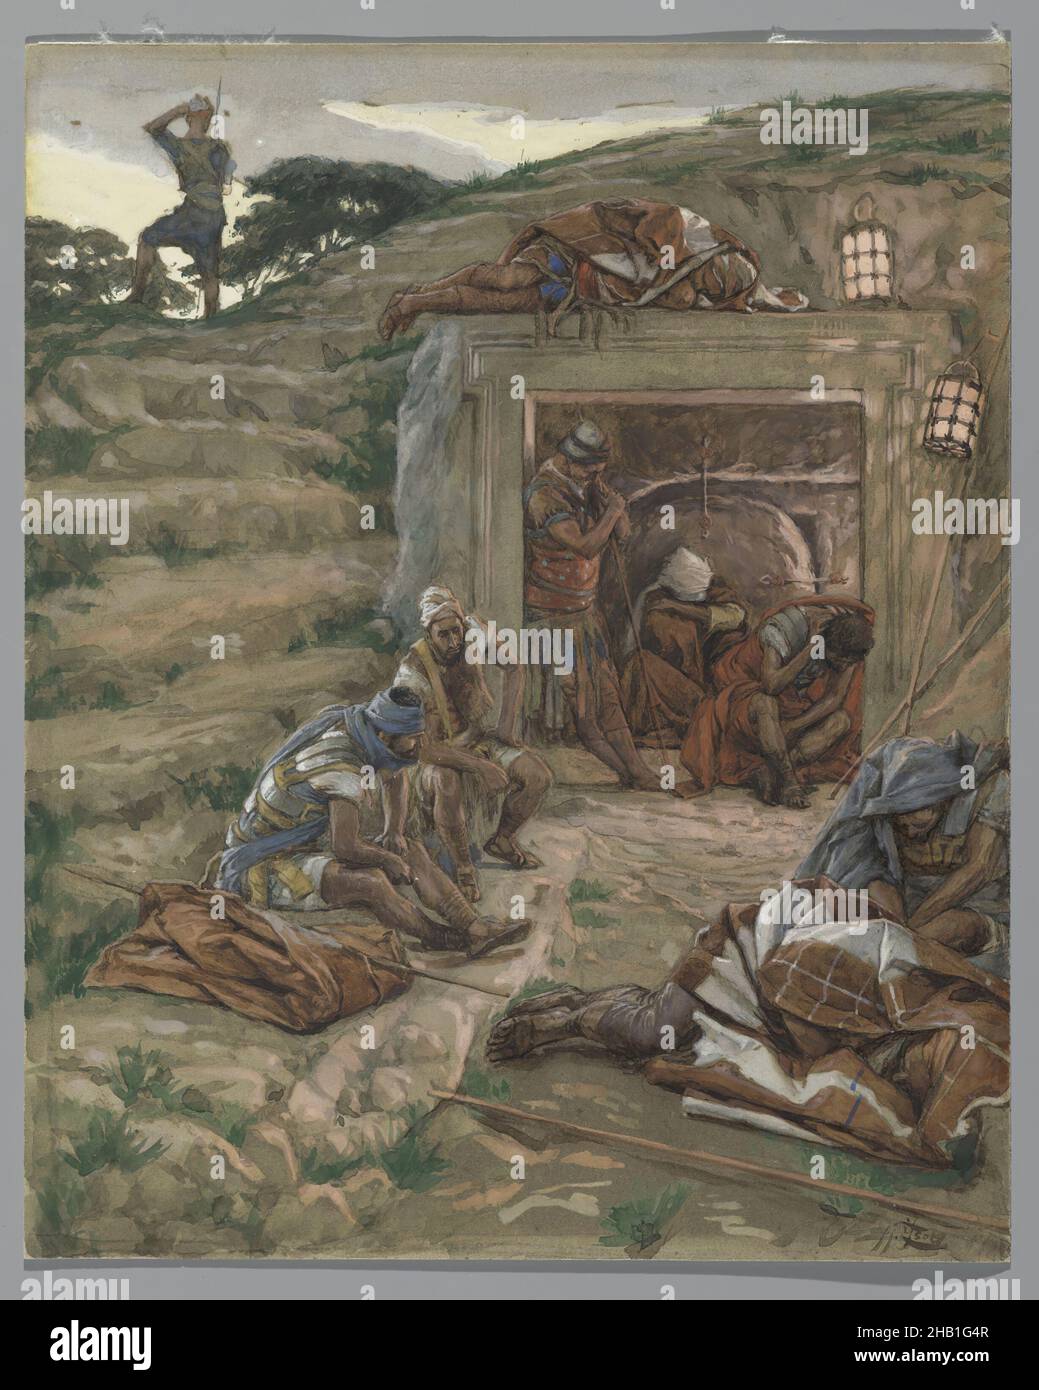 The Watch Over the Tomb, La garde du Tombeau, The Life of Our Lord Jesus Christ, La Vie de Notre-Seigneur Jésus-Christ, James Tissot, French, 1836-1902, Opaque watercolor over graphite on gray wove paper, France, 1886-1894, Image: 10 5/8 x 8 5/8 in., 27 x 21.9 cm, cave, french, graphite, guard, hill, James Tissot, Jesus, Matthew 27:22-26, Matthew 27:65-66, men, secure, sleep, soldiers, Tissot, tomb, watch, watercolor, wove paper Stock Photo